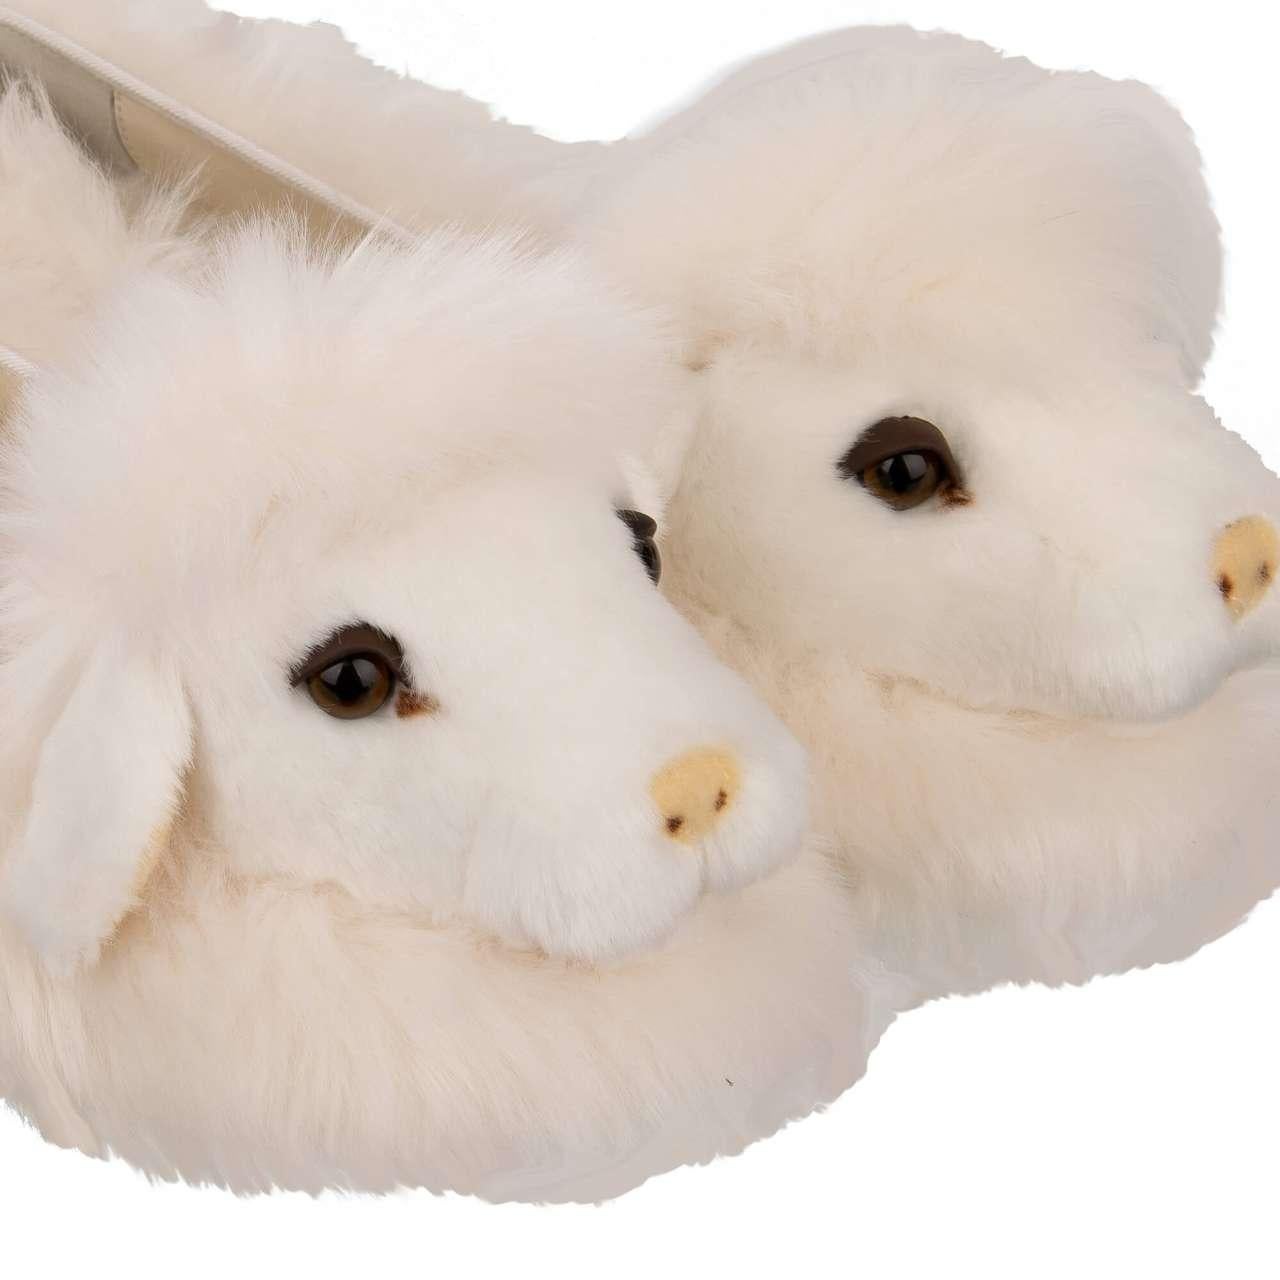 - Eco faux fur Sheep Toy Flats VALLY in white by DOLCE & GABBANA - New with Box - MADE IN ITALY - Faux eco fur - Sheep Toy - Model: CB0163-AA298-80995 - Material: 100% faux eco fur - Inner Material: leather - Sole: Leather - Color: White - Size: IT